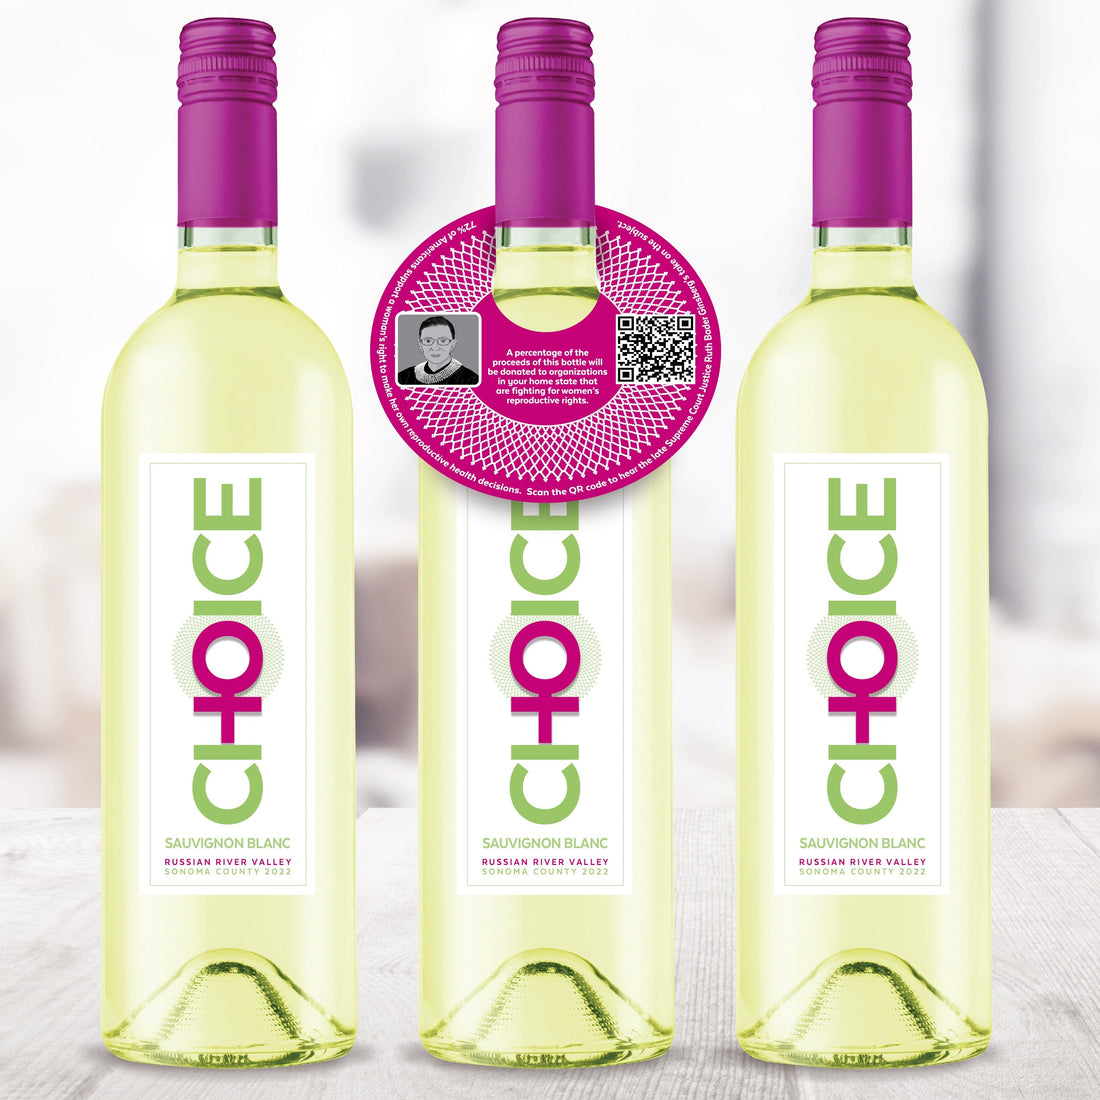 Choice Sauvignon Blanc--Drink Great Wine and Support Reproductive Freedom